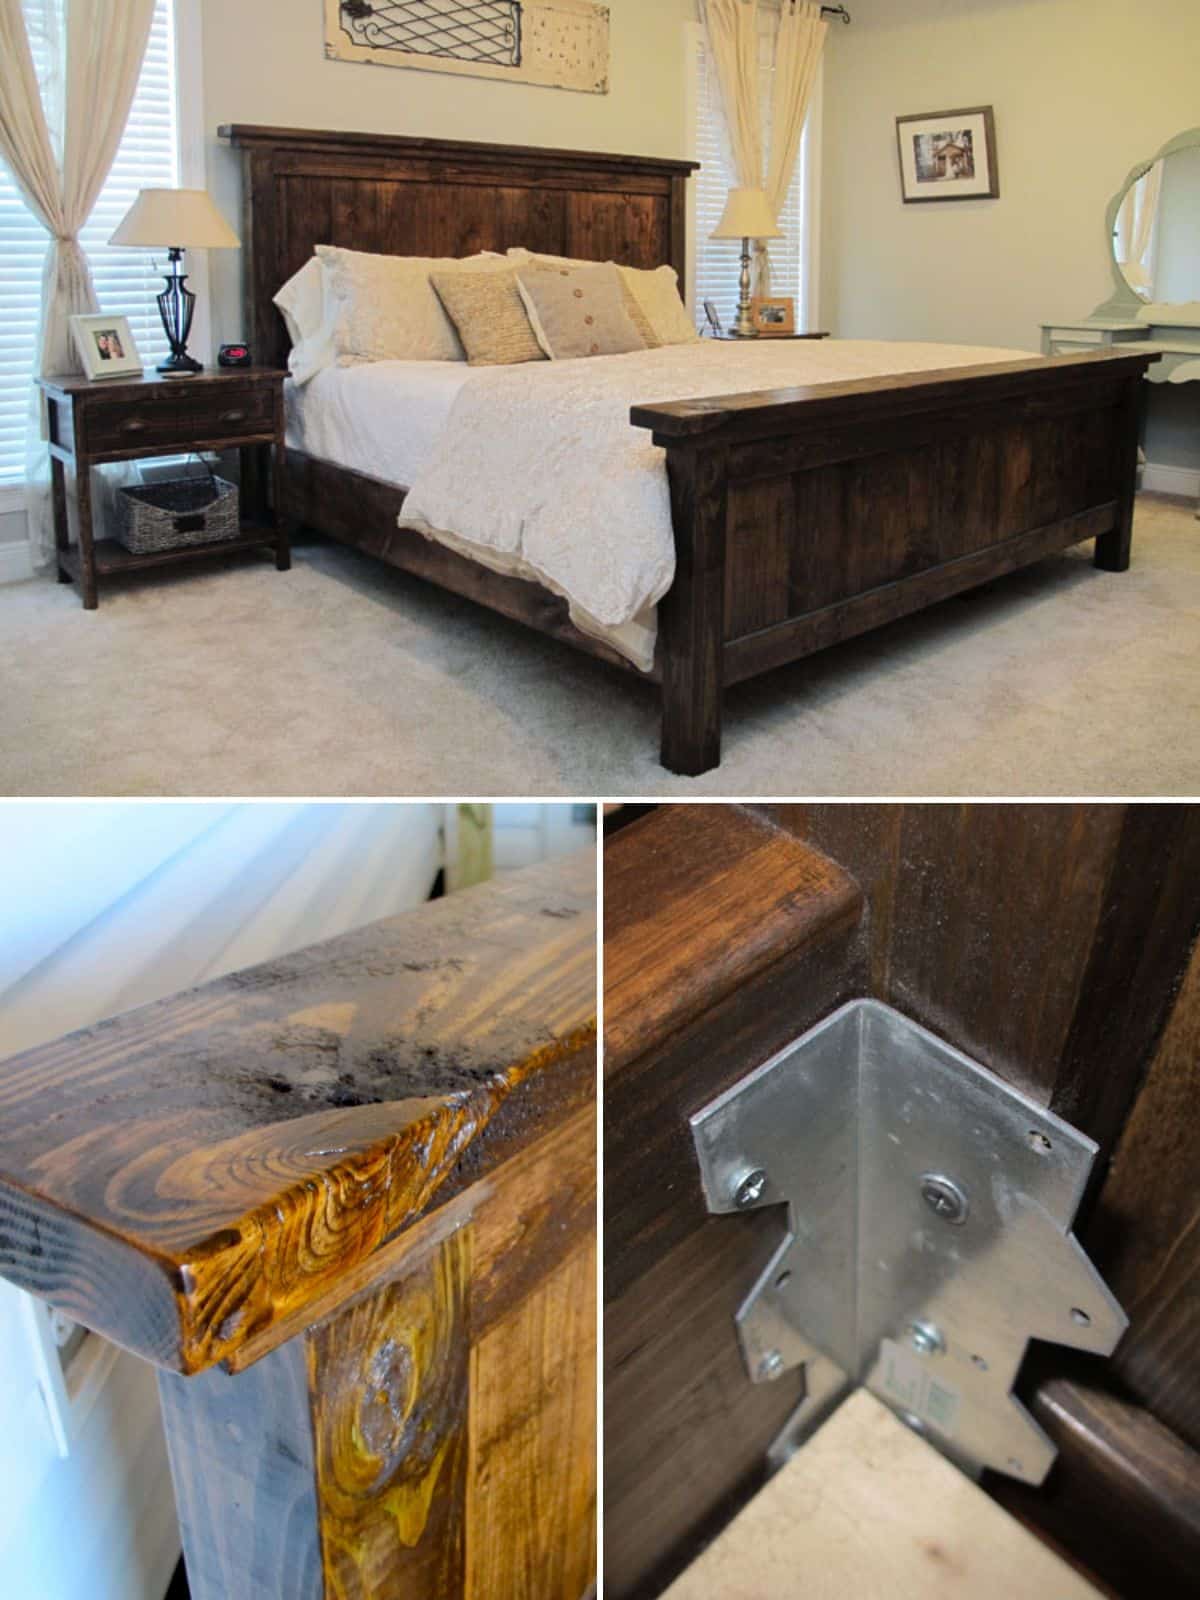 DIY Pottery Barn Inspired Farmhouse Bed collage.